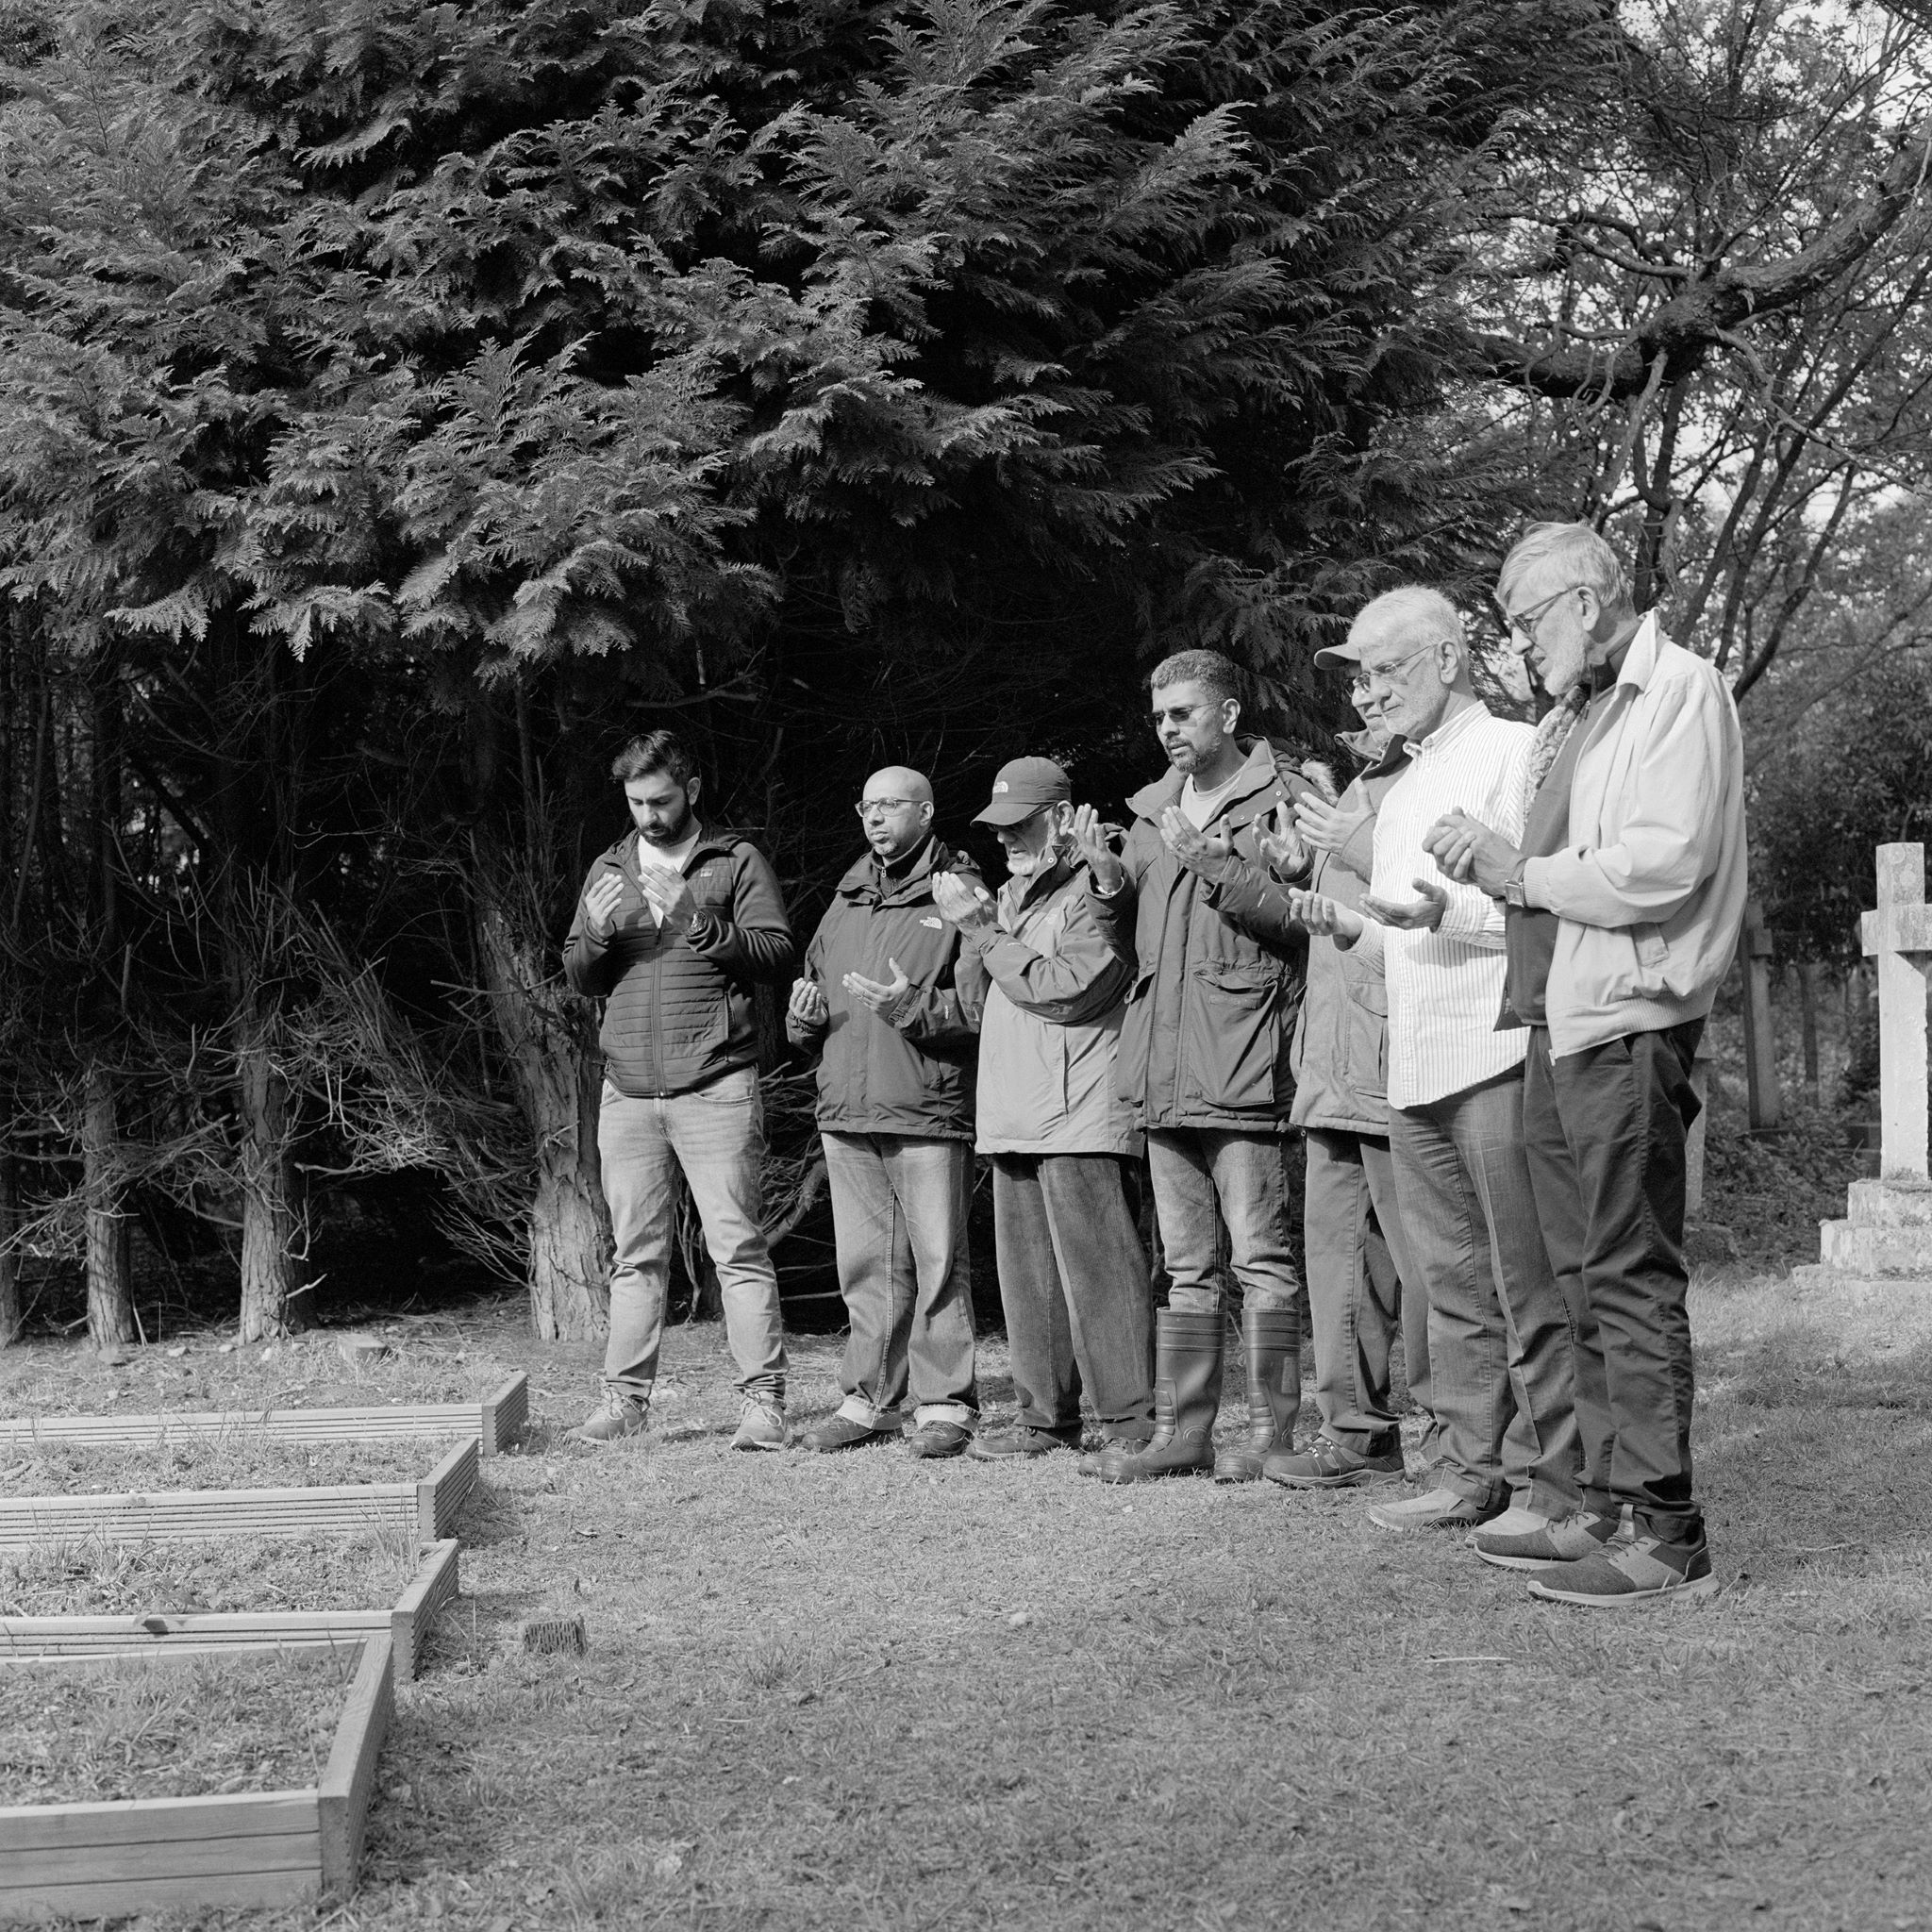 A group of people at prayer in a cemetery